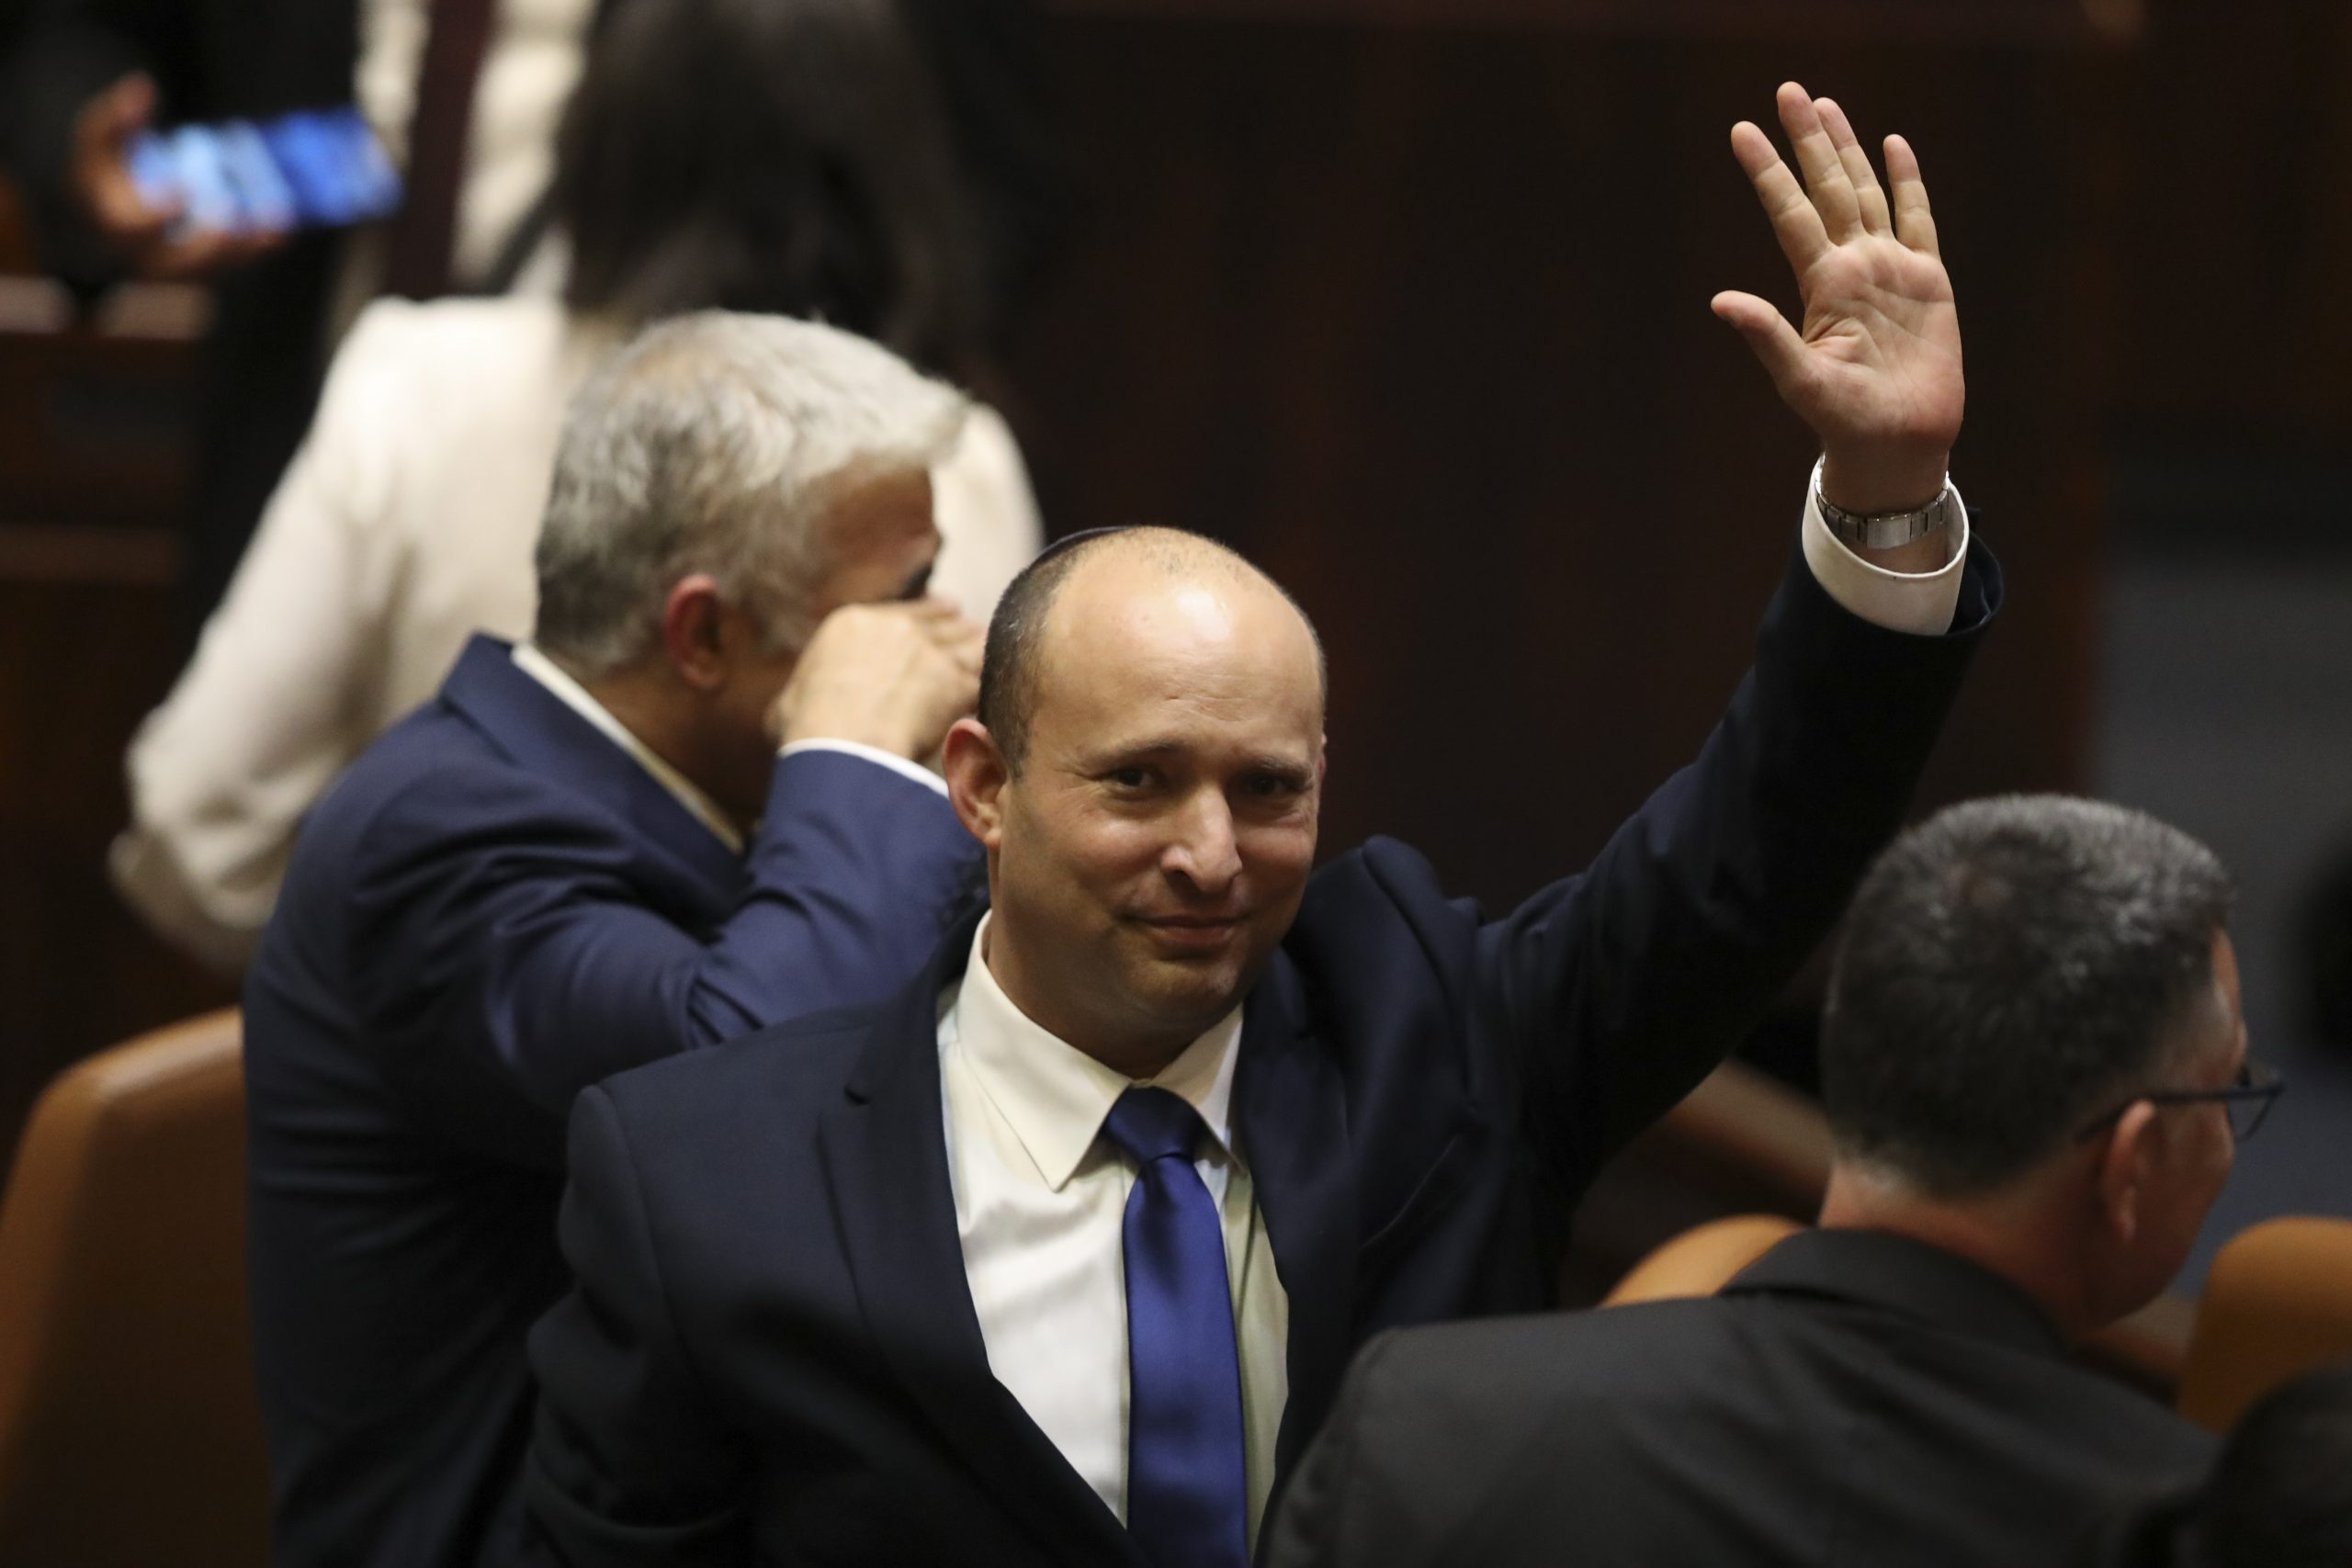 Israel's new prime minister Naftali Bennett raises his hand during a Knesset session in Jerusalem Sunday, June 13, 2021. Israel's parliament has voted in favor of a new coalition government, formally ending Prime Minister Benjamin Netanyahu's historic 12-year rule. Naftali Bennett, a former ally of Netanyahu became the new prime minister (AP Photo/Ariel Schalit)